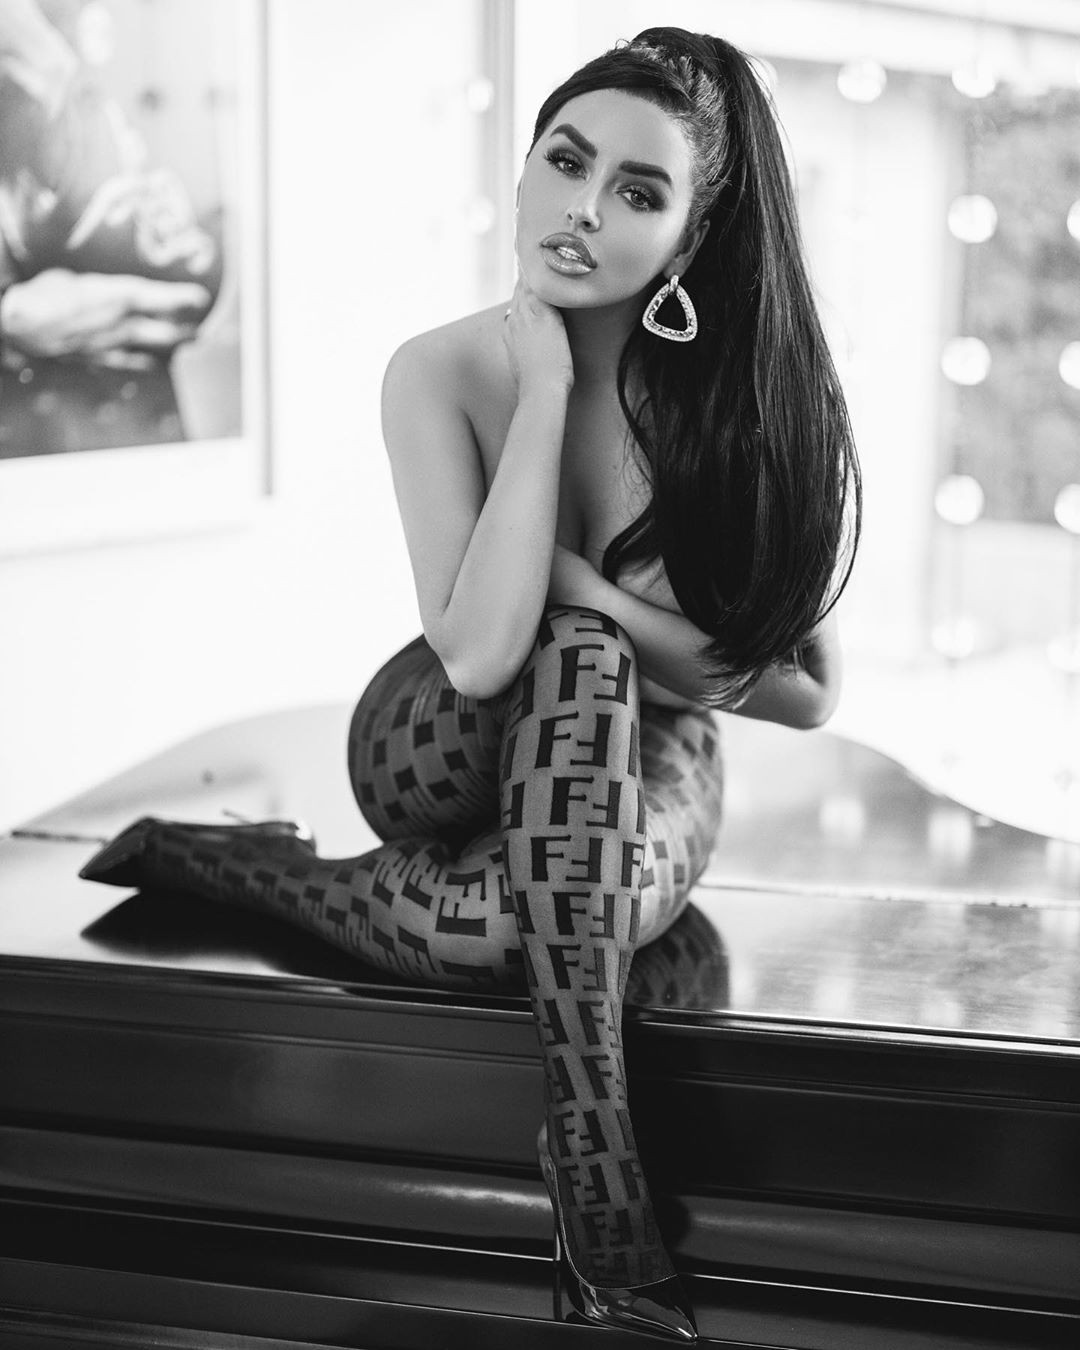 Beautiful Recent Abigail Ratchford Pictures: Instagram girls,  instagram profile picture,  instagram models,  most liked Instagram photo,  Jojo Babie,  Super Hot Abigail Ratchford,  Hot Instagram Models,  Beautiful Abigail Ratchford,  Adorable Abigail Ratchford  